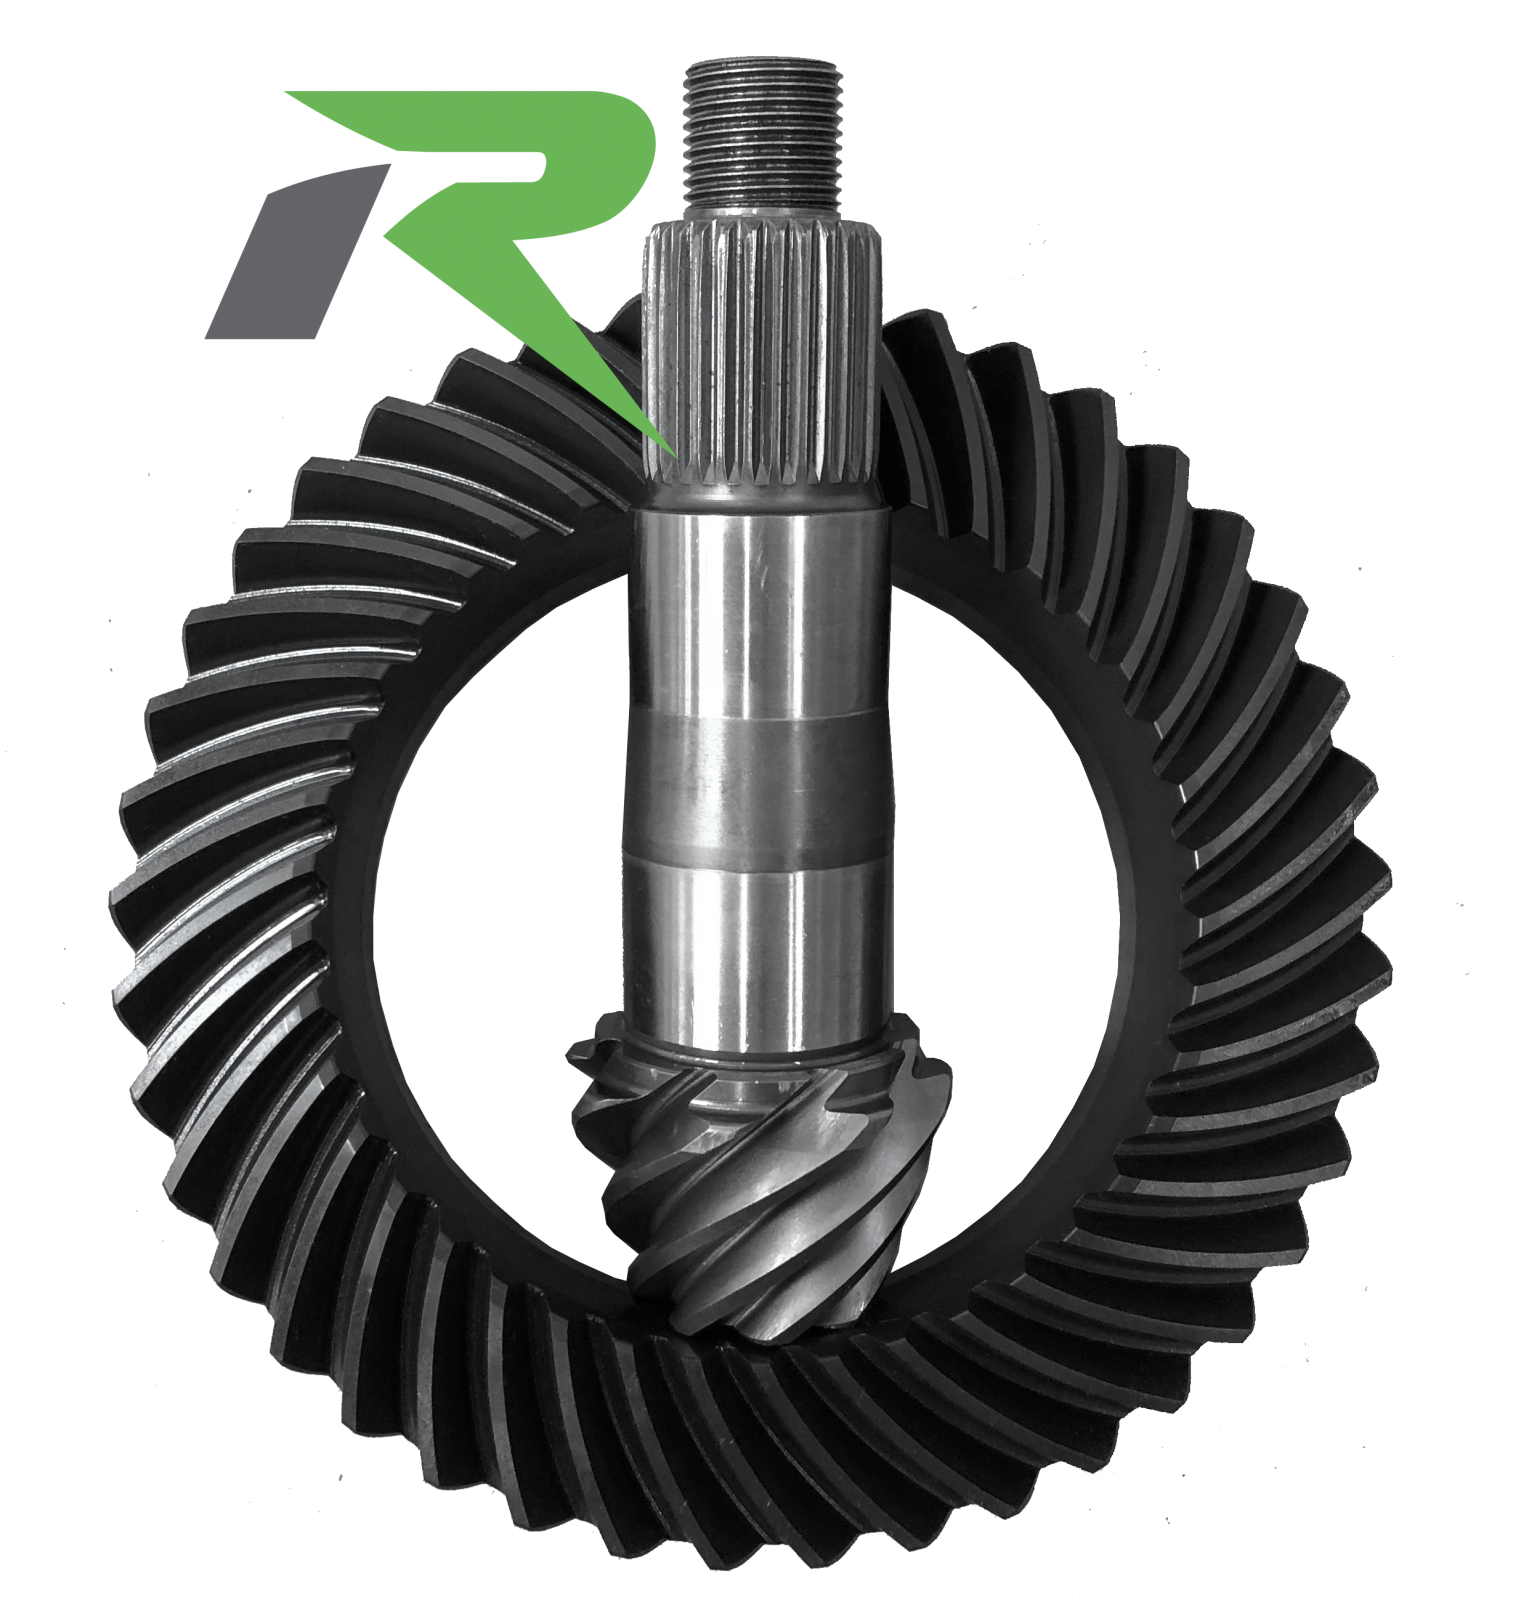 Revolution Gear & Axle Rear Ring And Pinion, Dana 44 220Mm Standard, 5.38 Ratio, 12 Bolt For